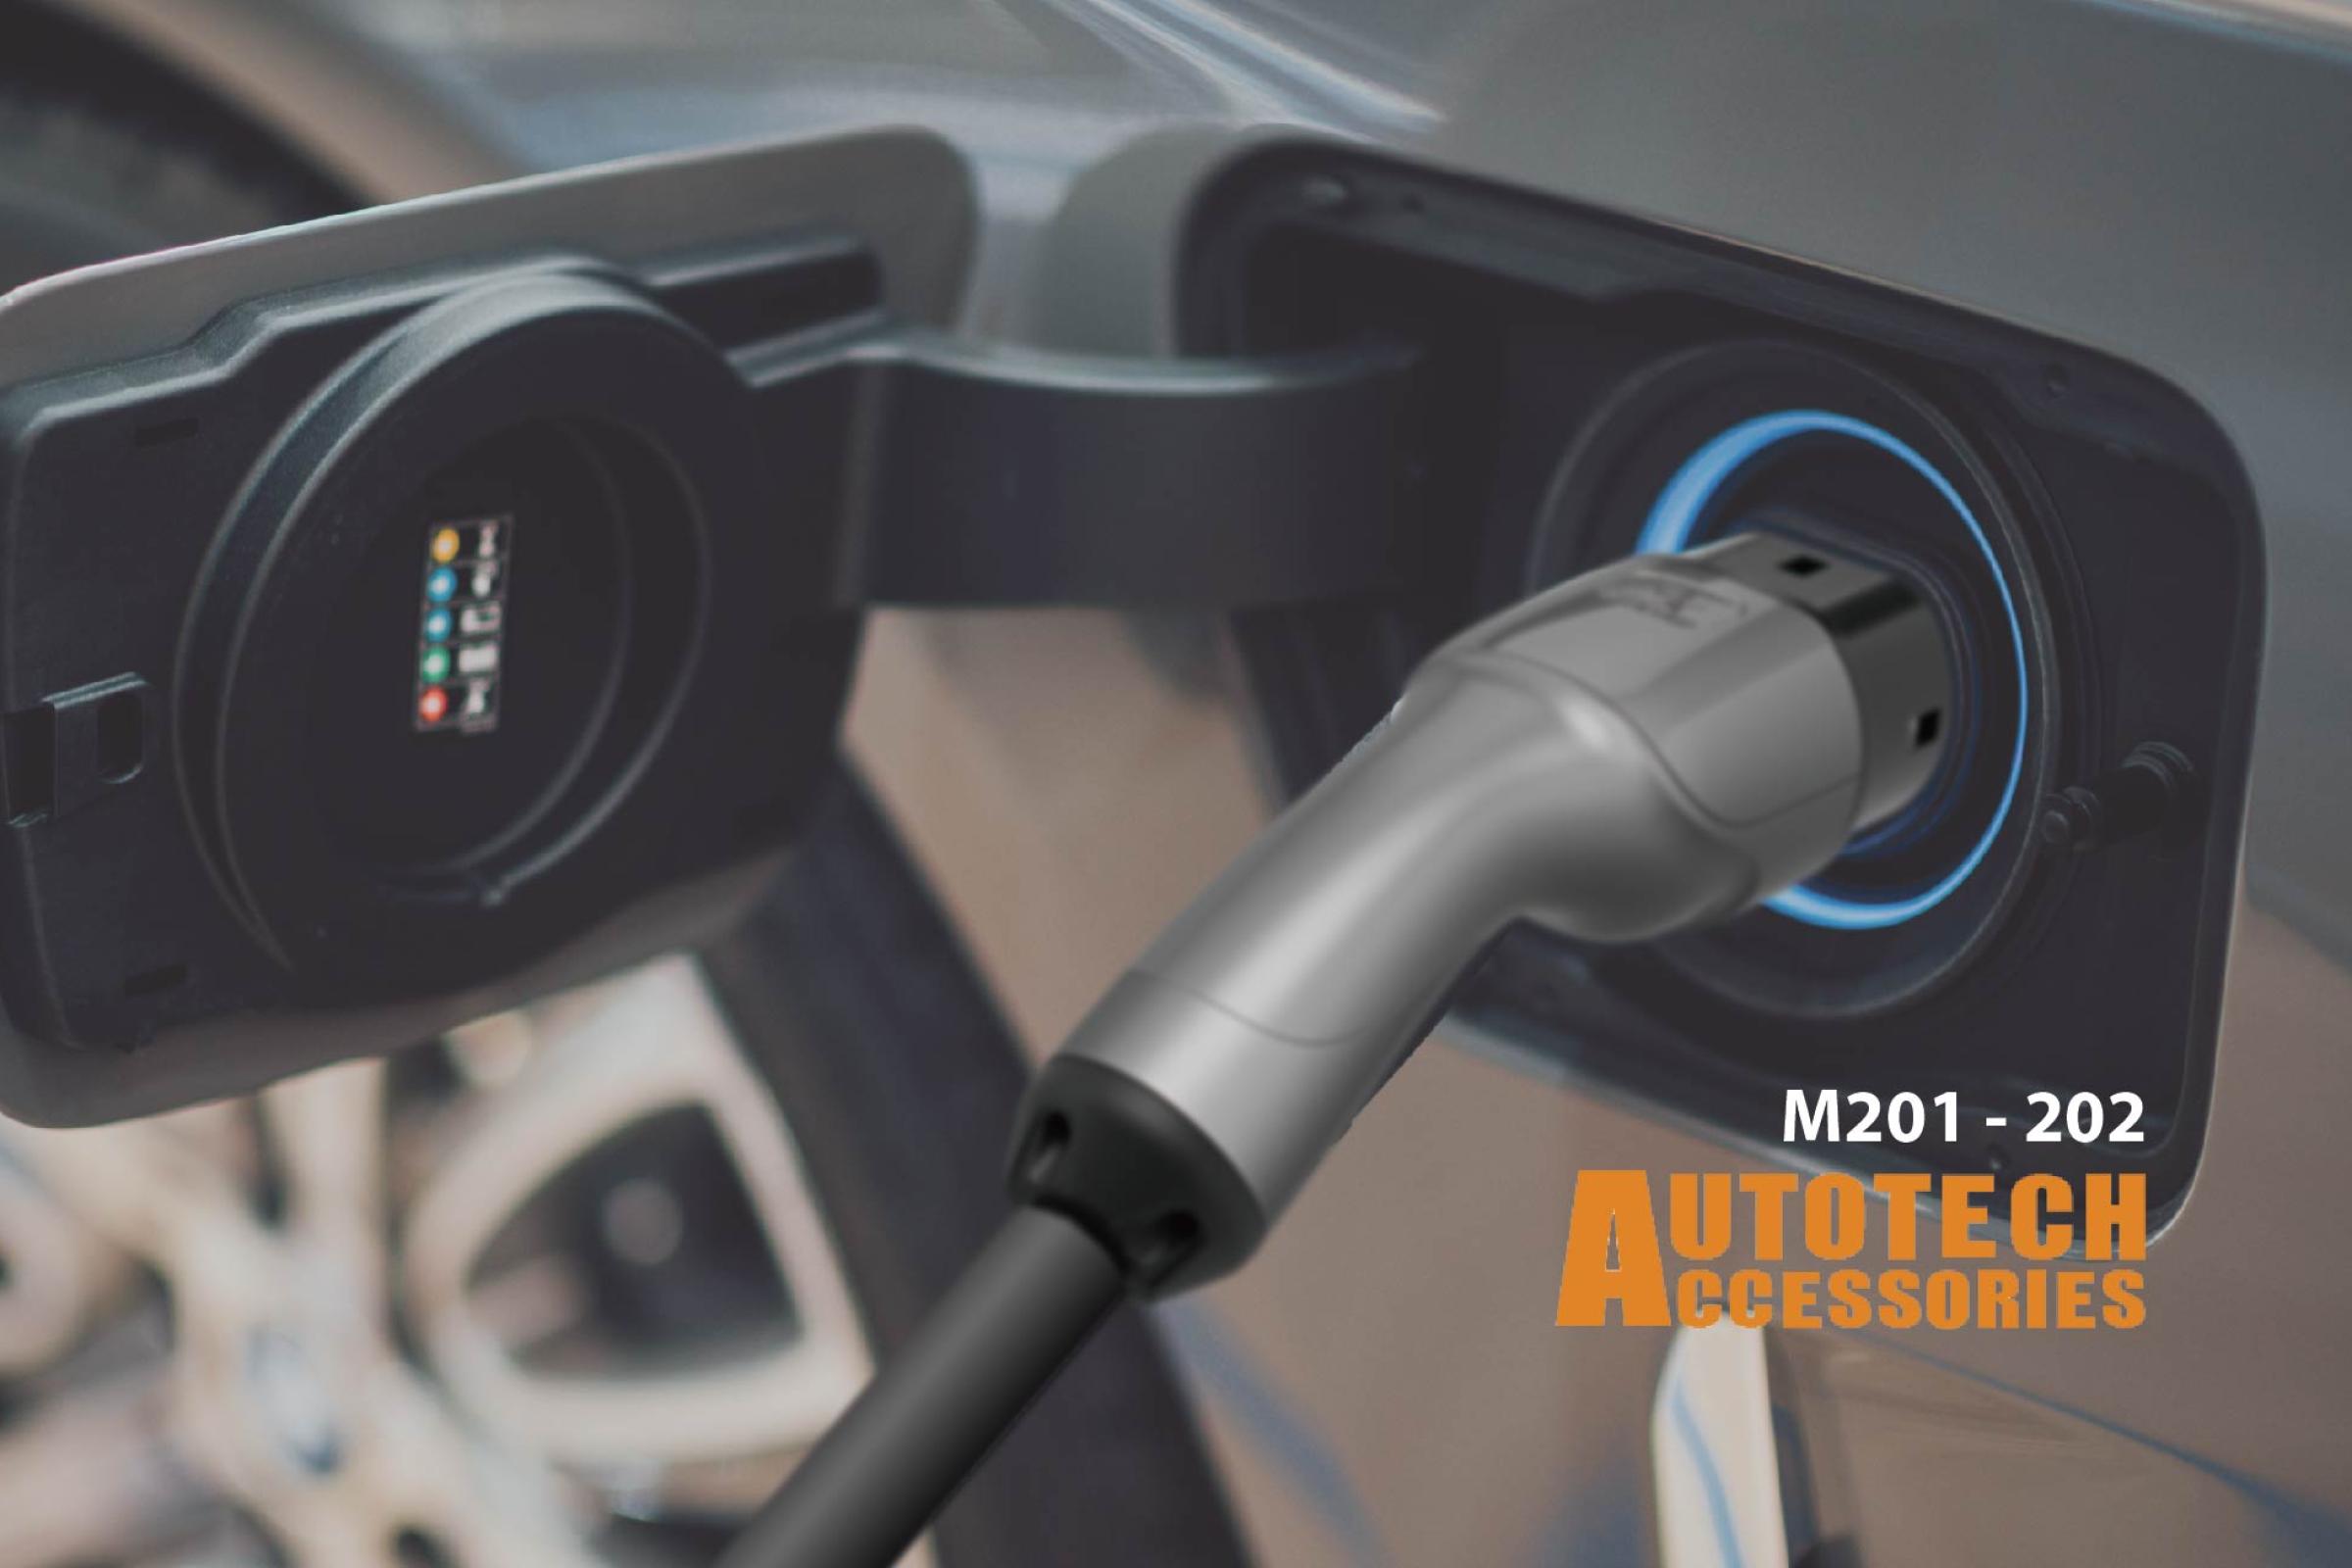 Meet CCP at Autotech & Accessories Vietnam 18th-21th May!